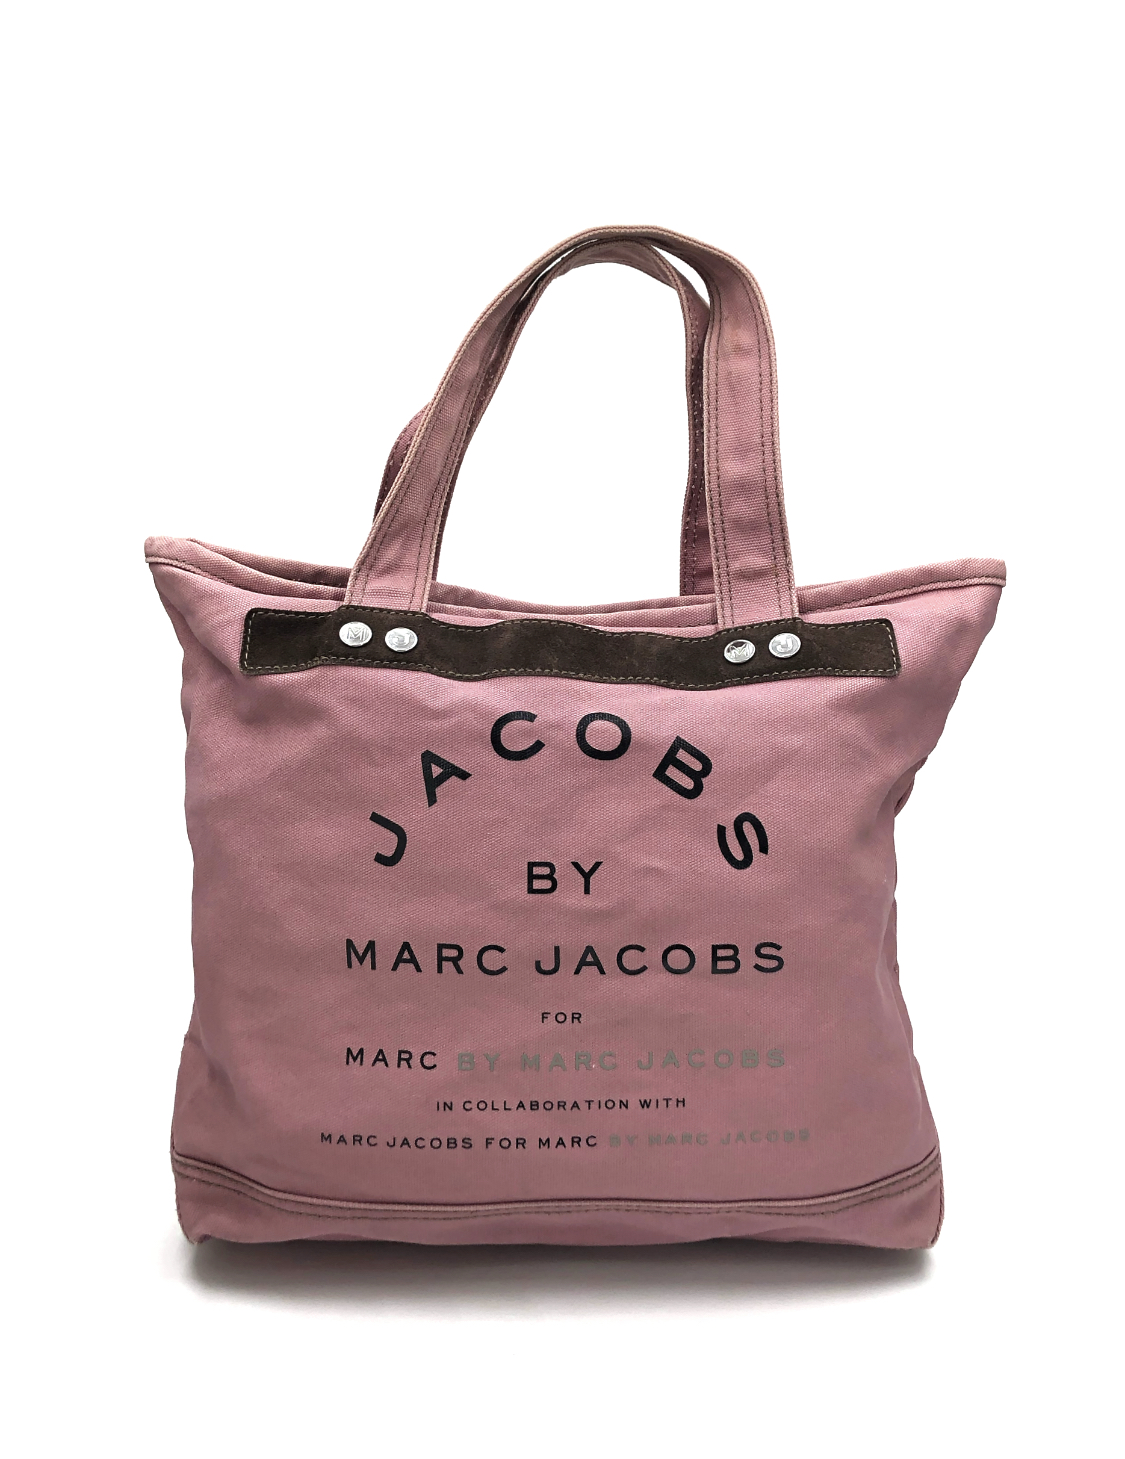 Marc by Marc Jacobs Light Purple Tote